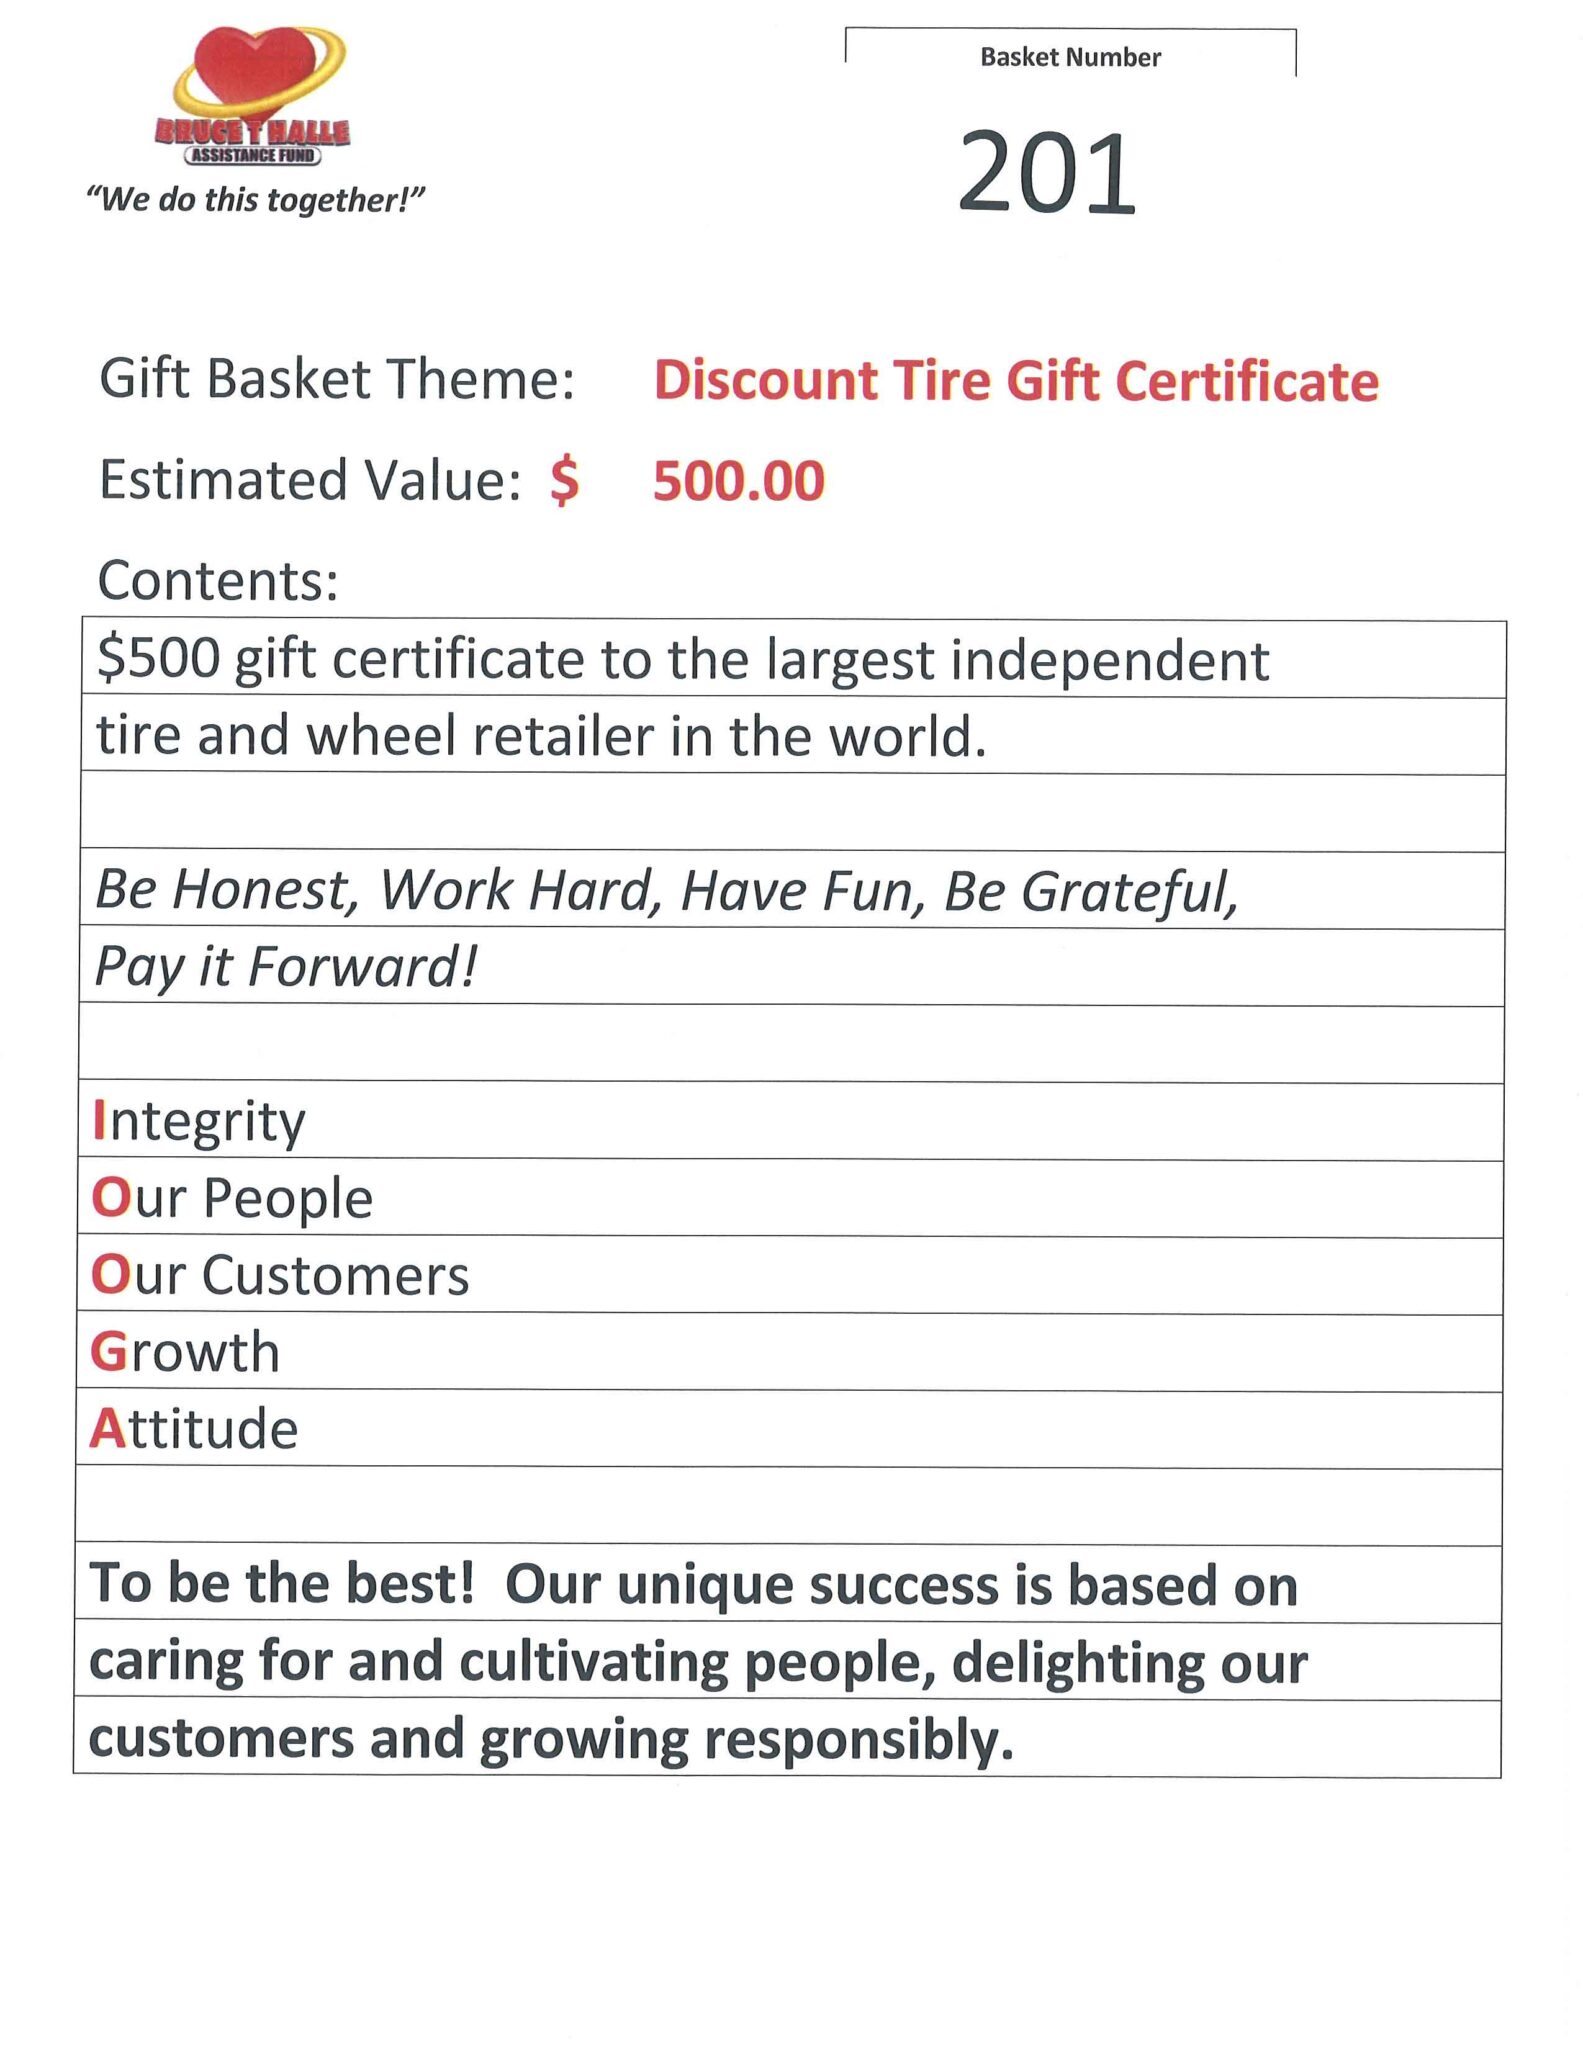 Discount Tire Gift Certificate Basket Bruce T Halle Assistance Fund